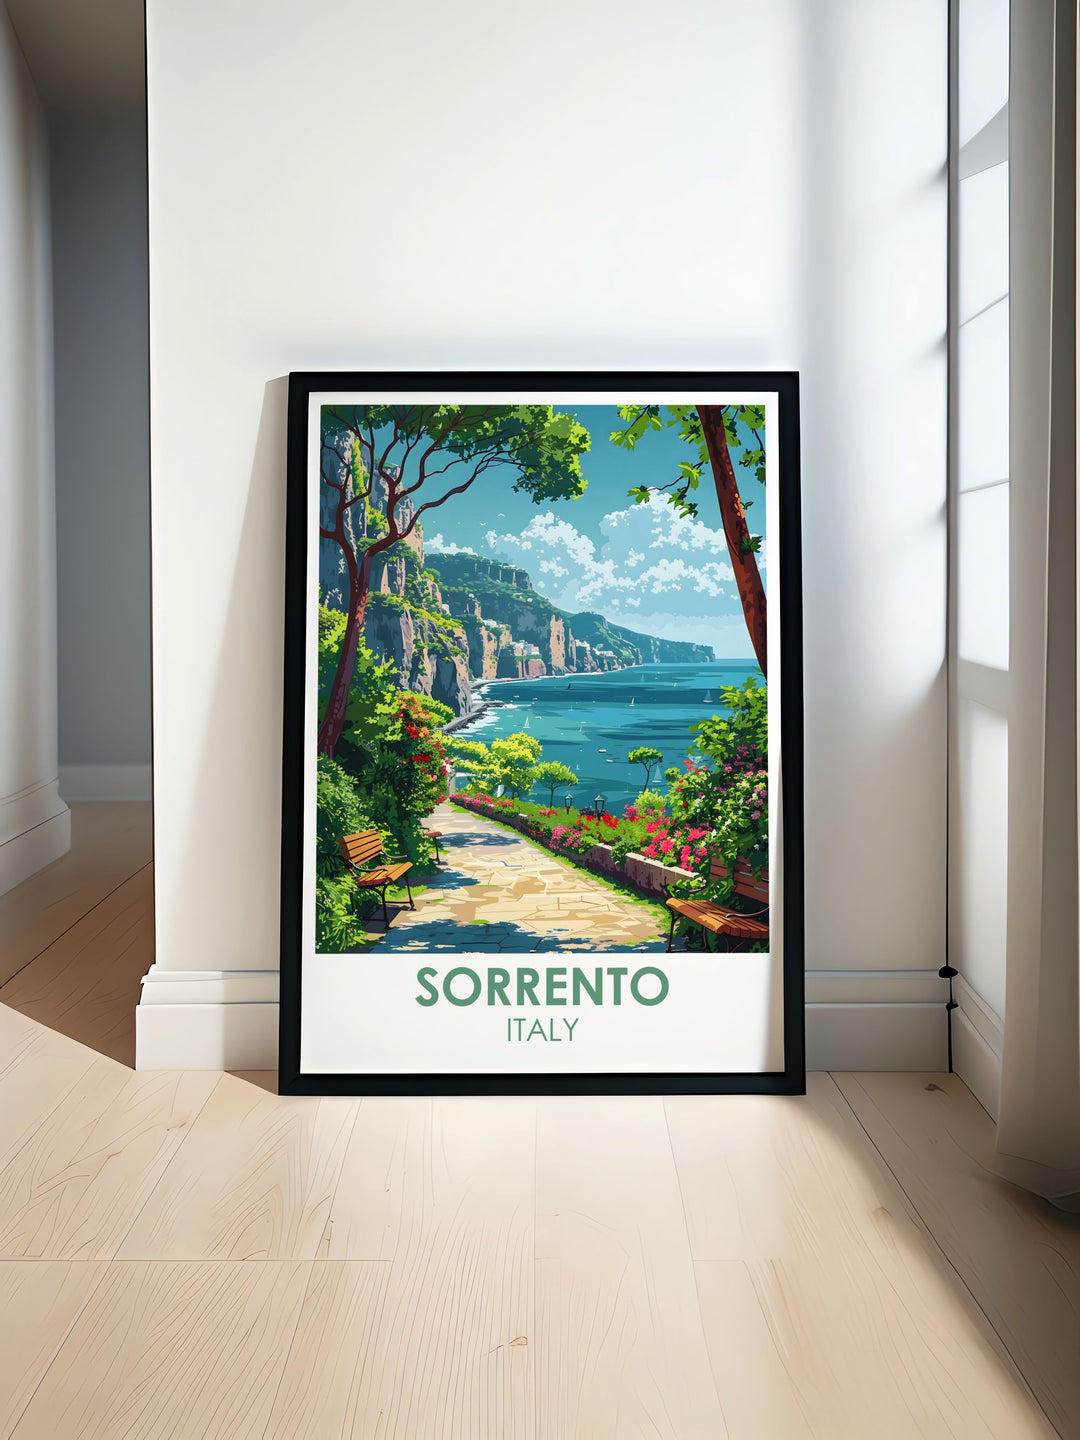 Sorrento travel poster featuring Villa Comunale Park with its lush greenery and panoramic views of the Bay of Naples perfect for adding Italian charm to any space. Detailed Italy print capturing the serene beauty of Sorrento Italy ideal for home decor and travel enthusiasts.